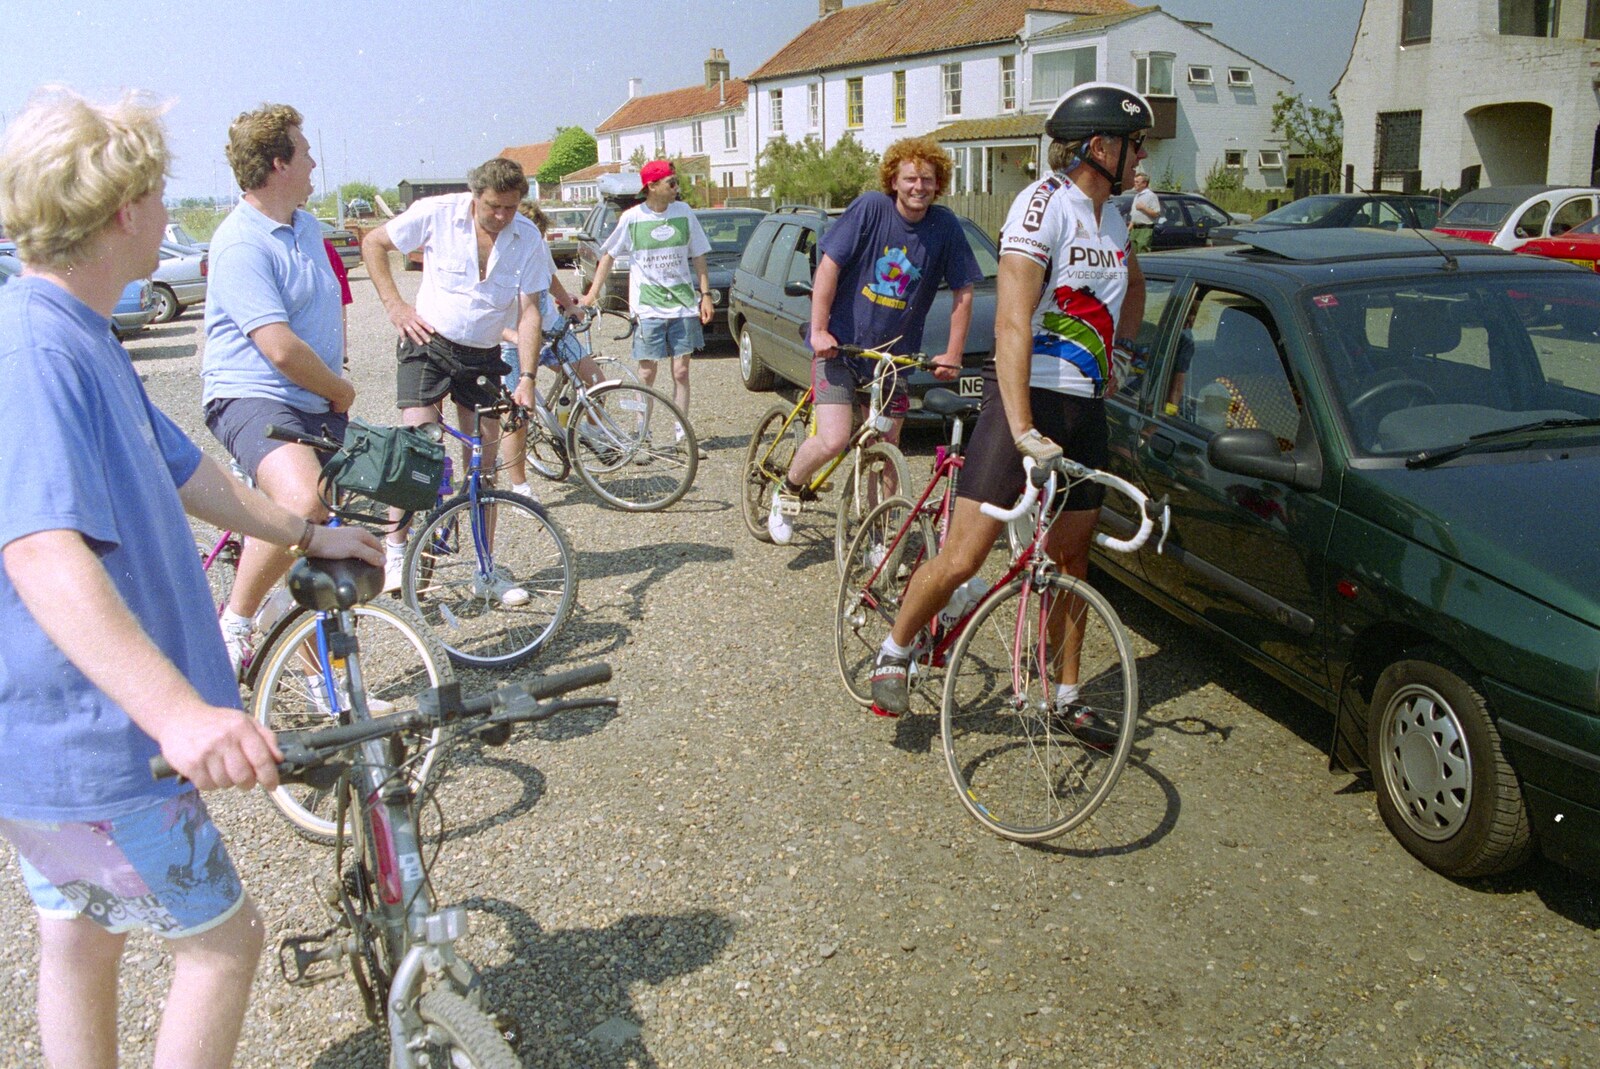 Milling around outside the Harbour Inn from The First BSCC Bike Ride to Southwold, Suffolk - 10th June 1996